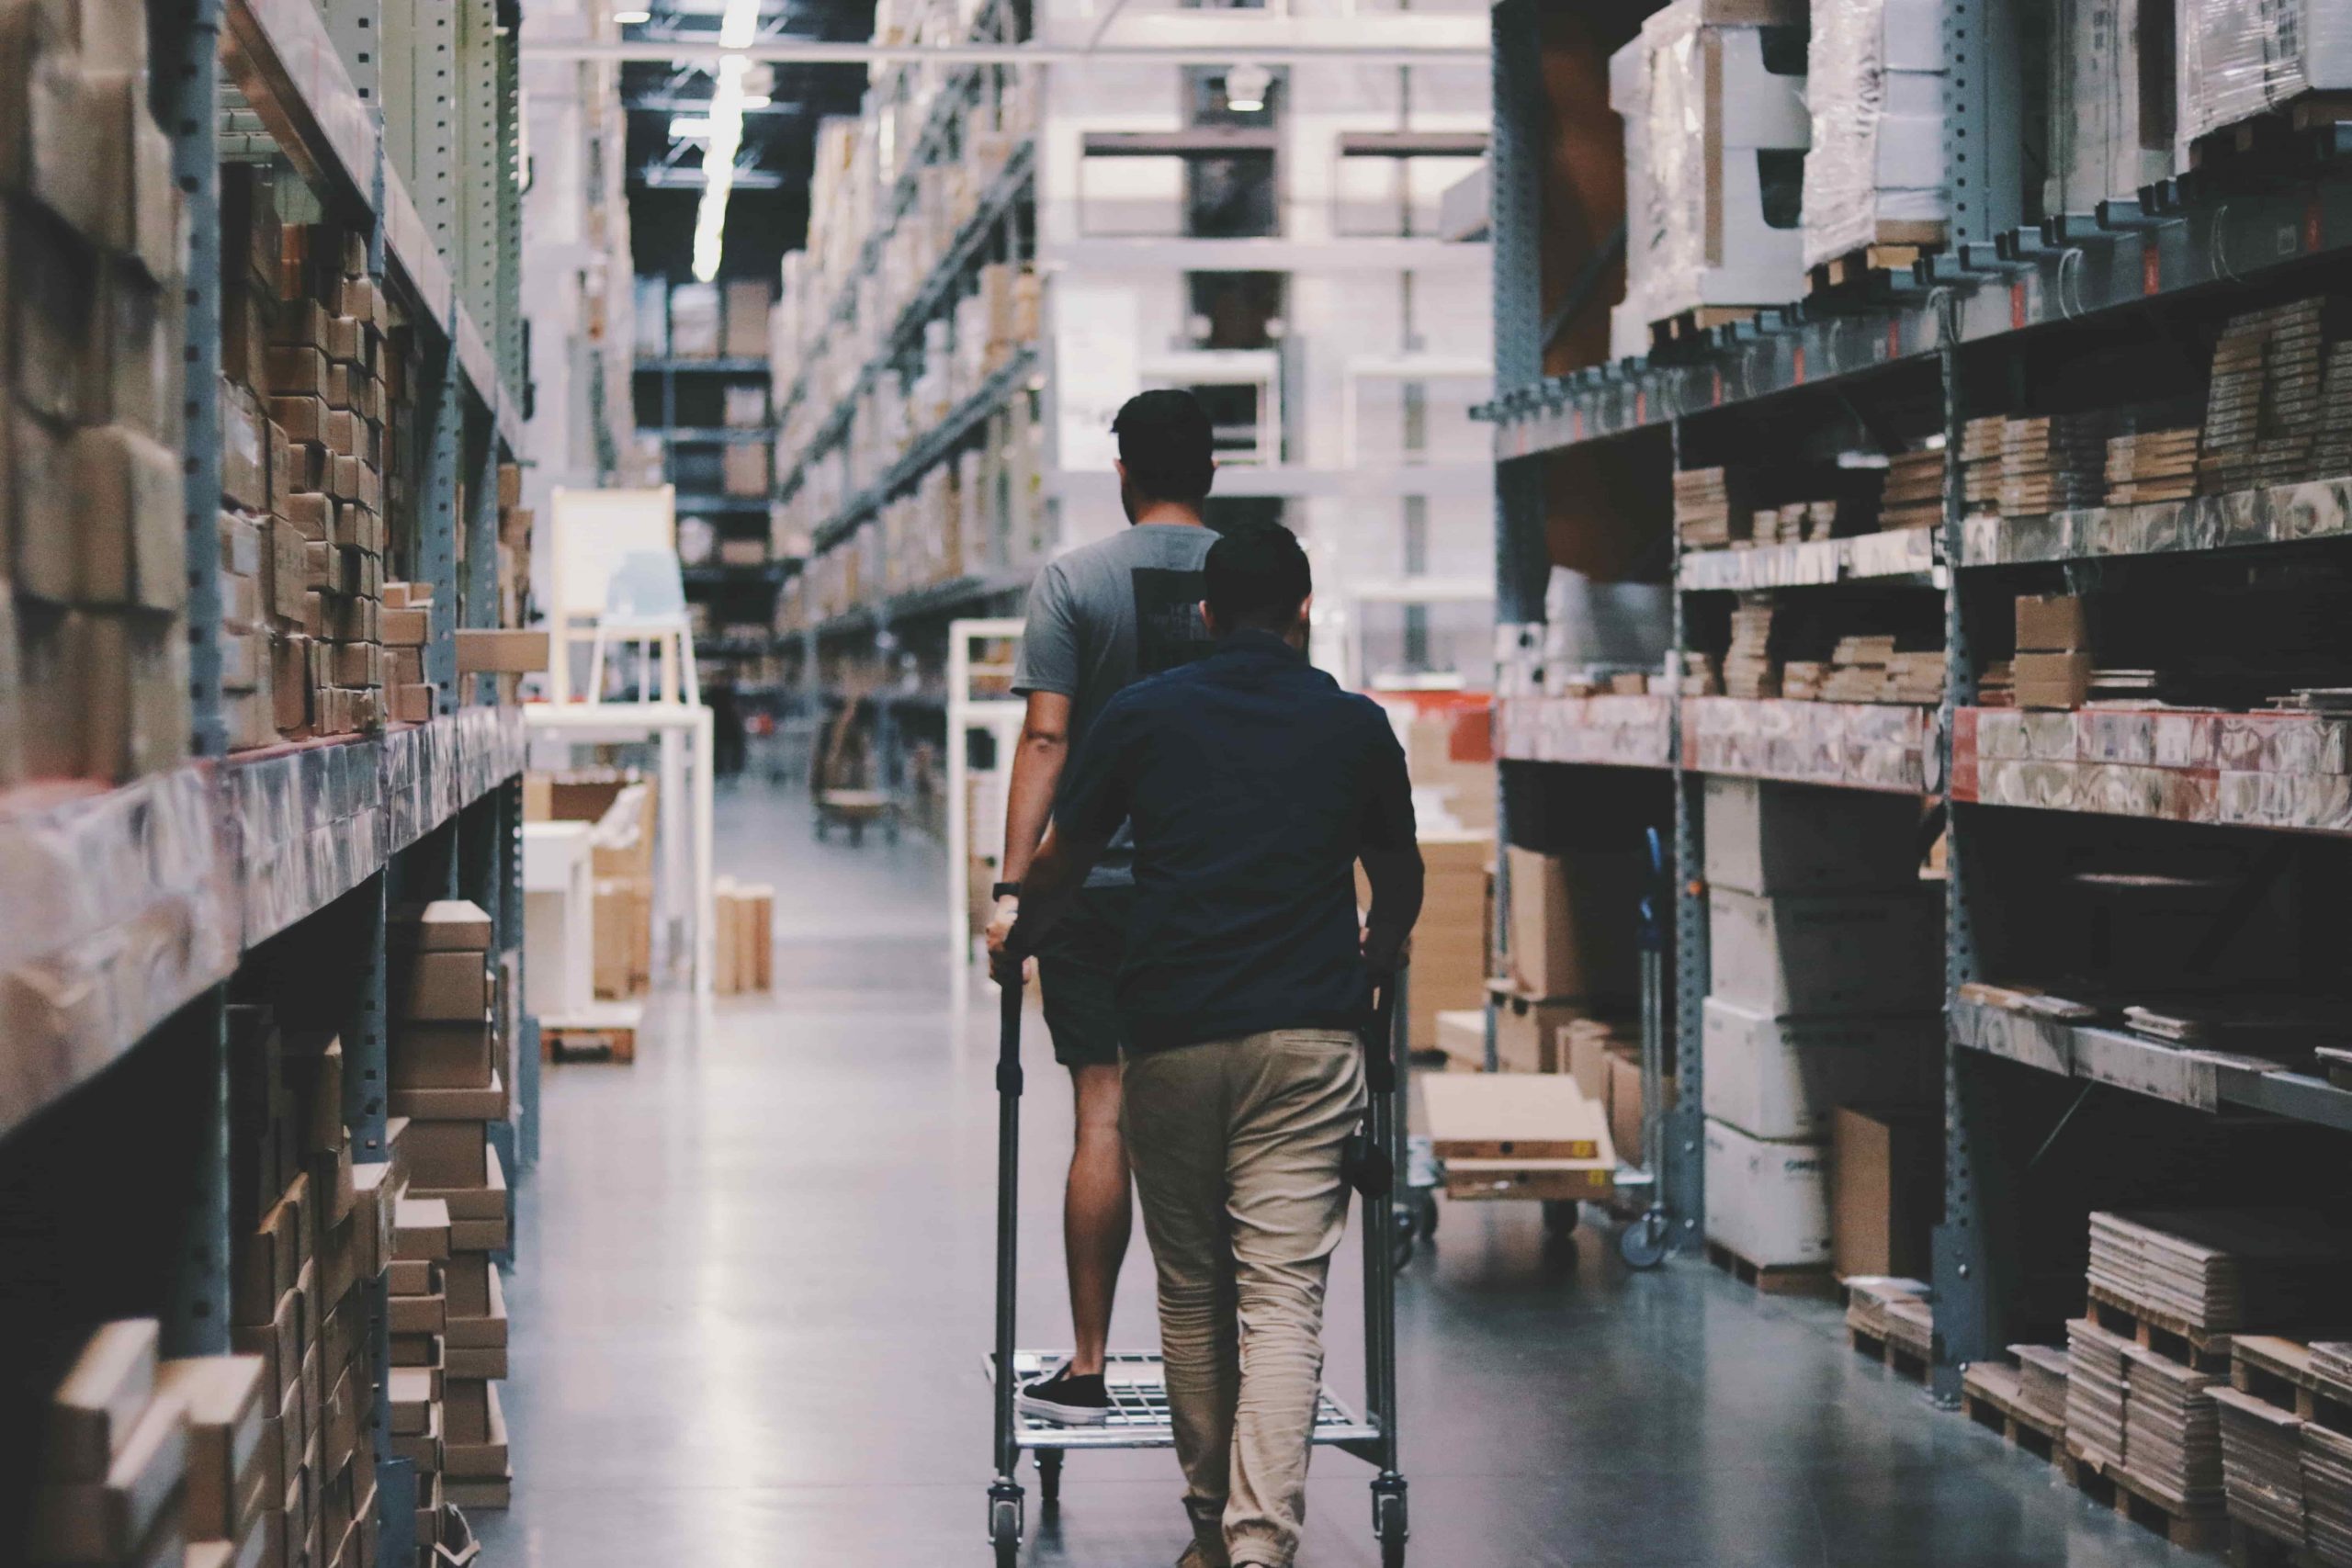 Inventory management in a big warehouse